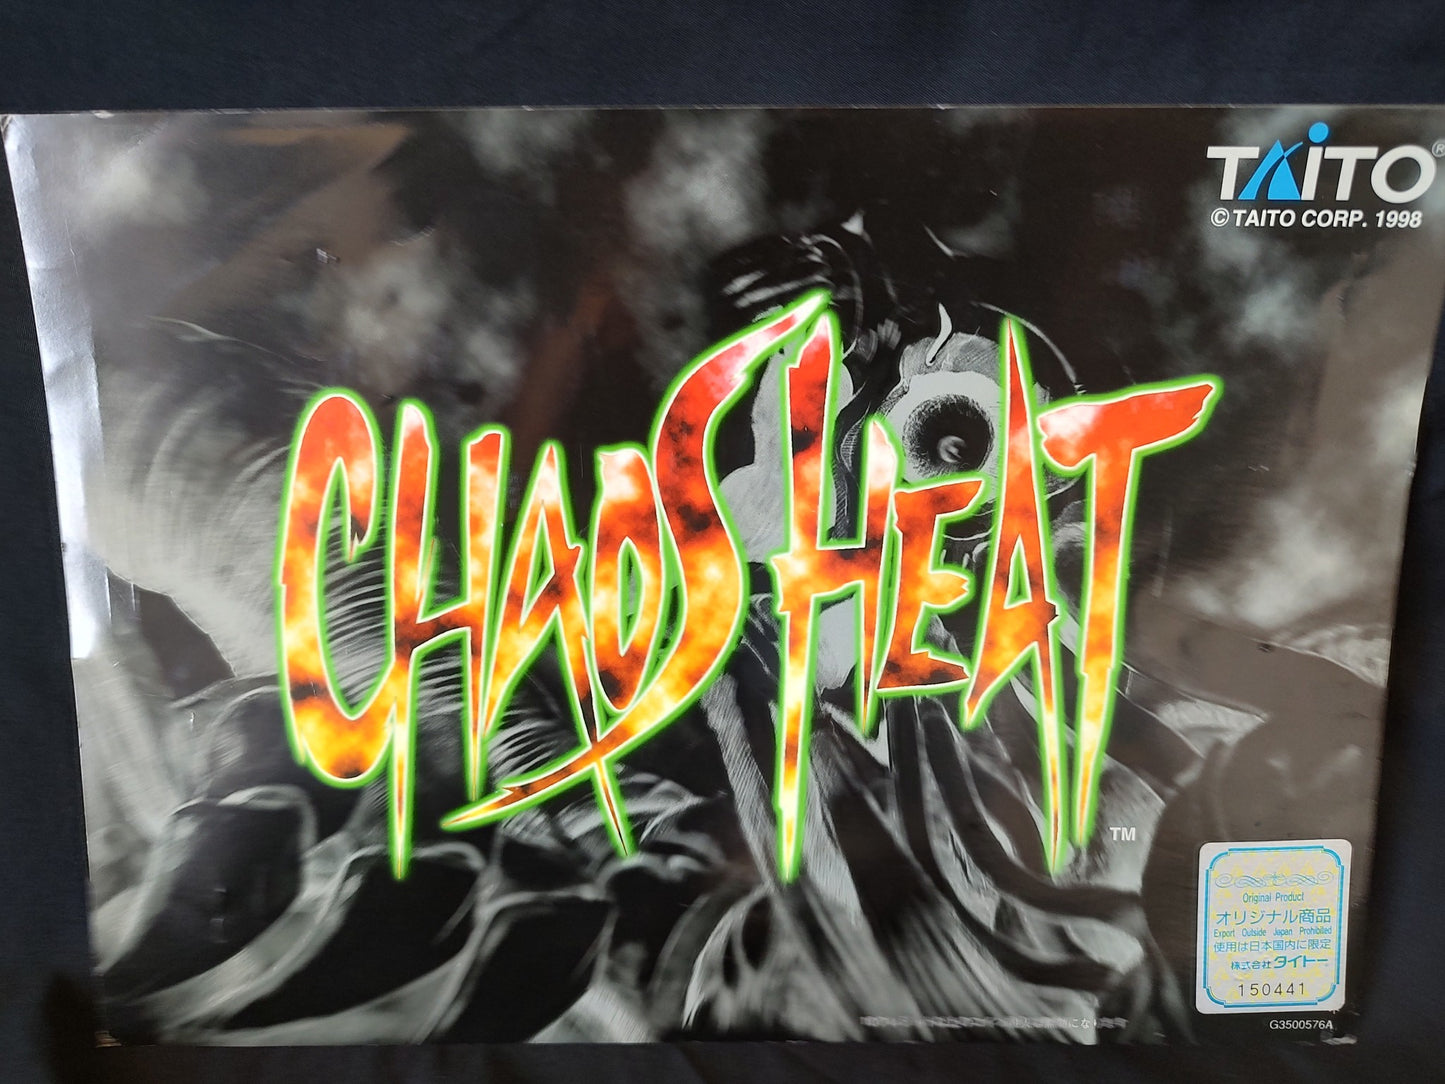 Chaos Heat TAITO G-NET Arcard System JAMMA B Board and Inst card set-g0401-